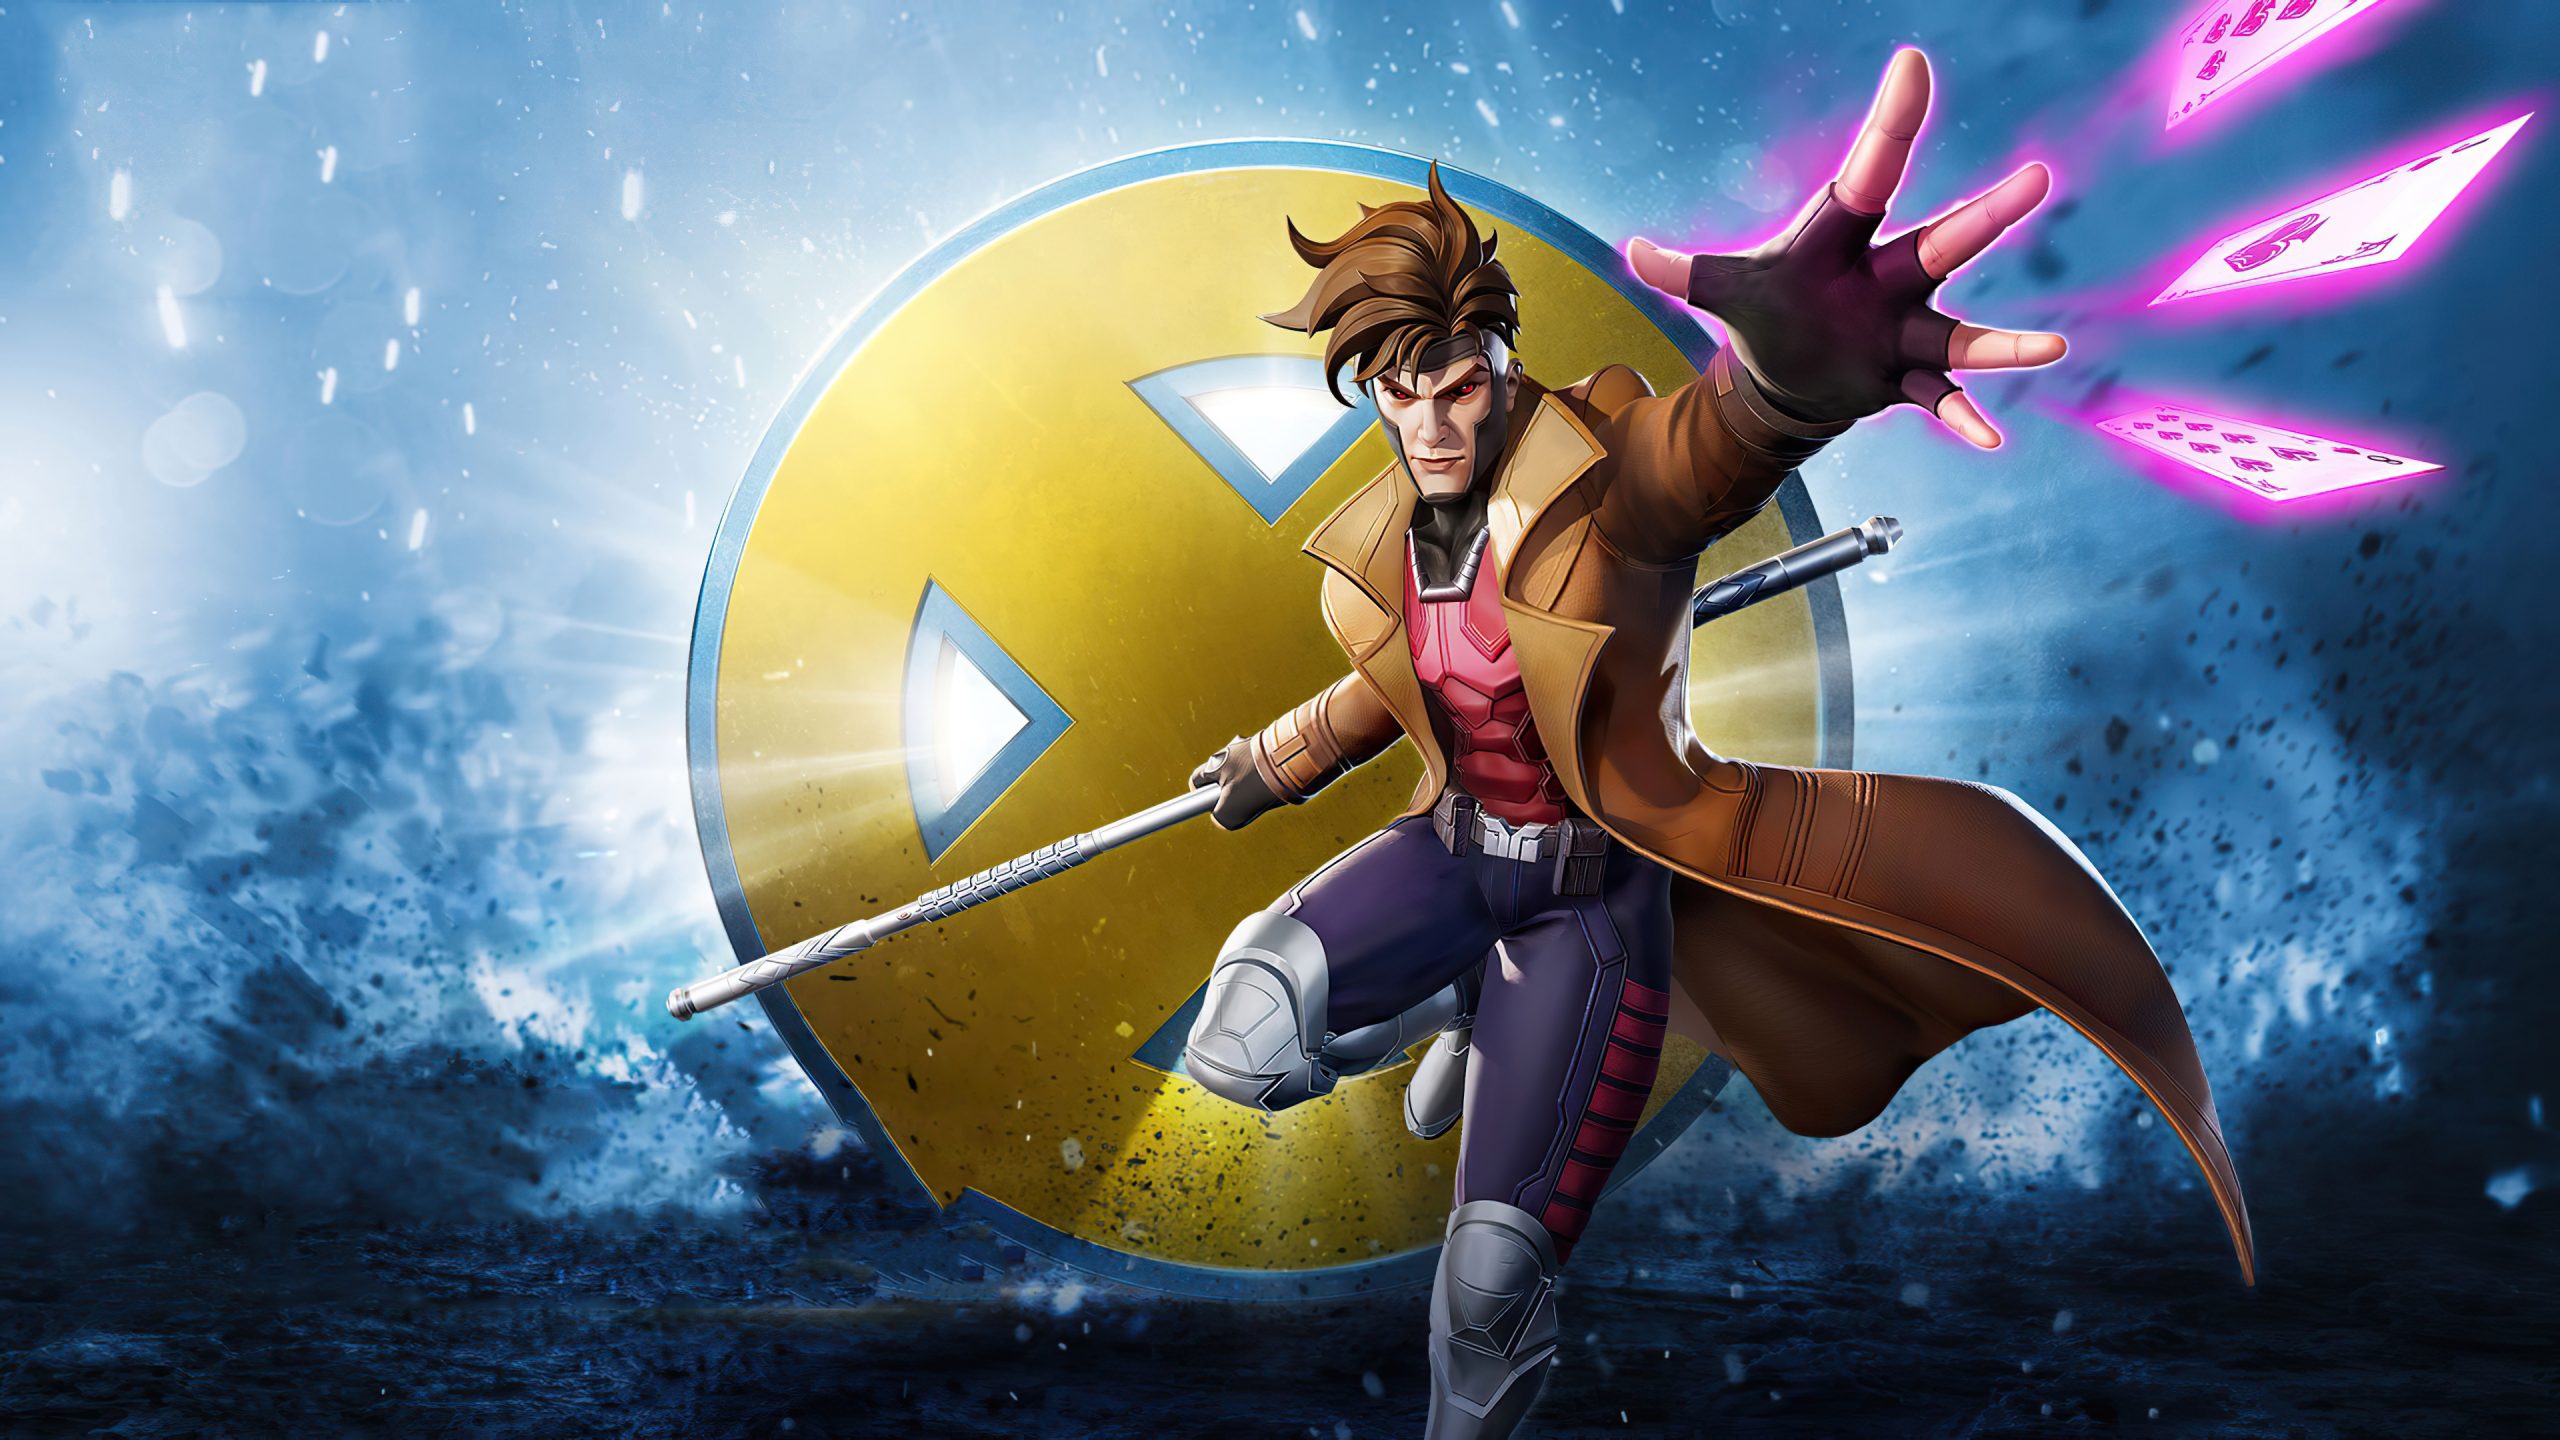 Gambit in Top 10 Marvel Characters that deserve their own film